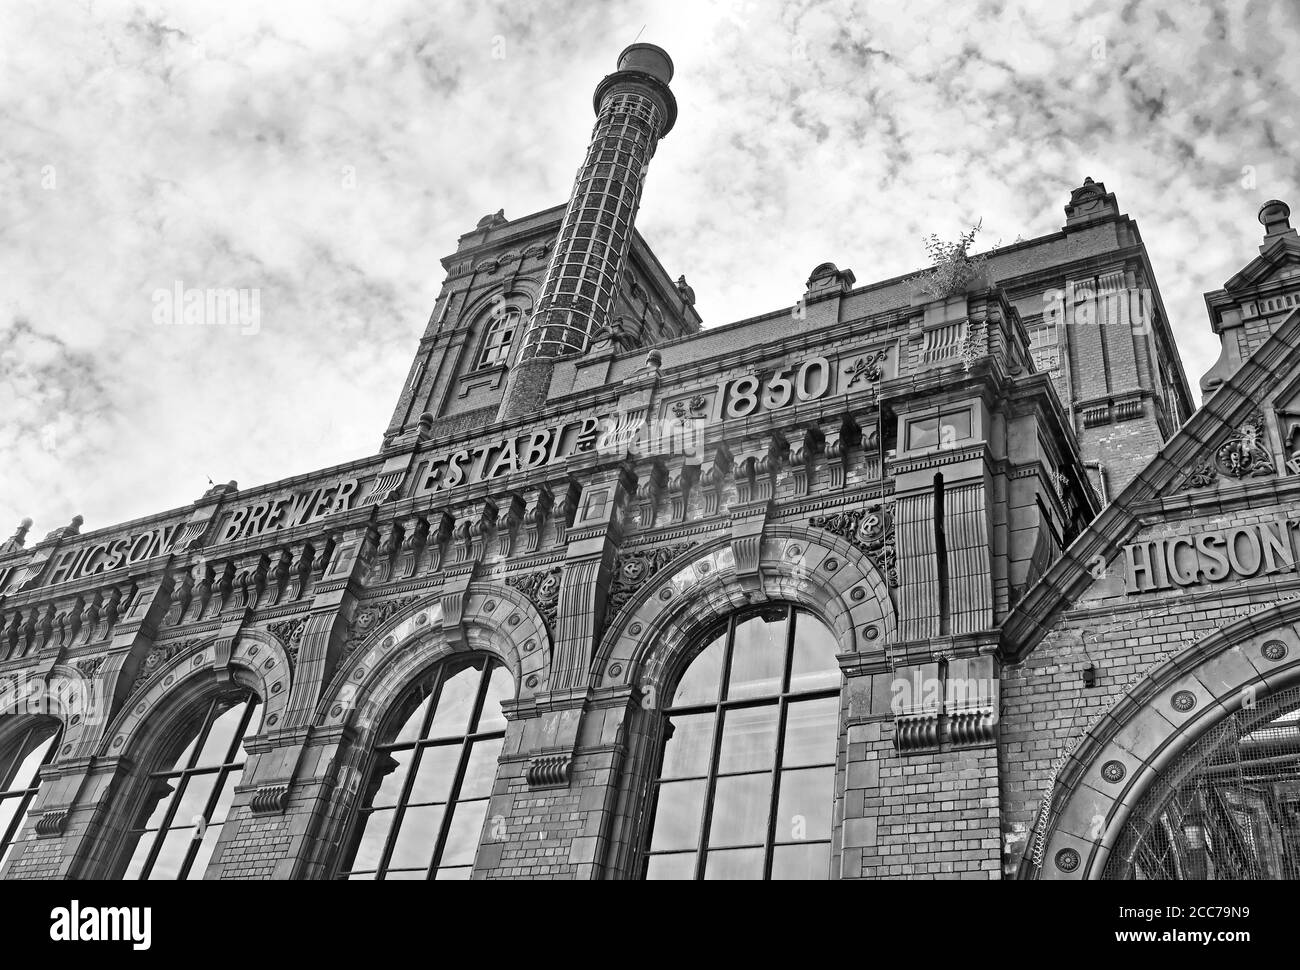 Higsons, Cains Brewery, 39 Stanhope St, Liverpool, Merseyside, England, UK, L8 5RE, Black and White, Monochrome Stockfoto